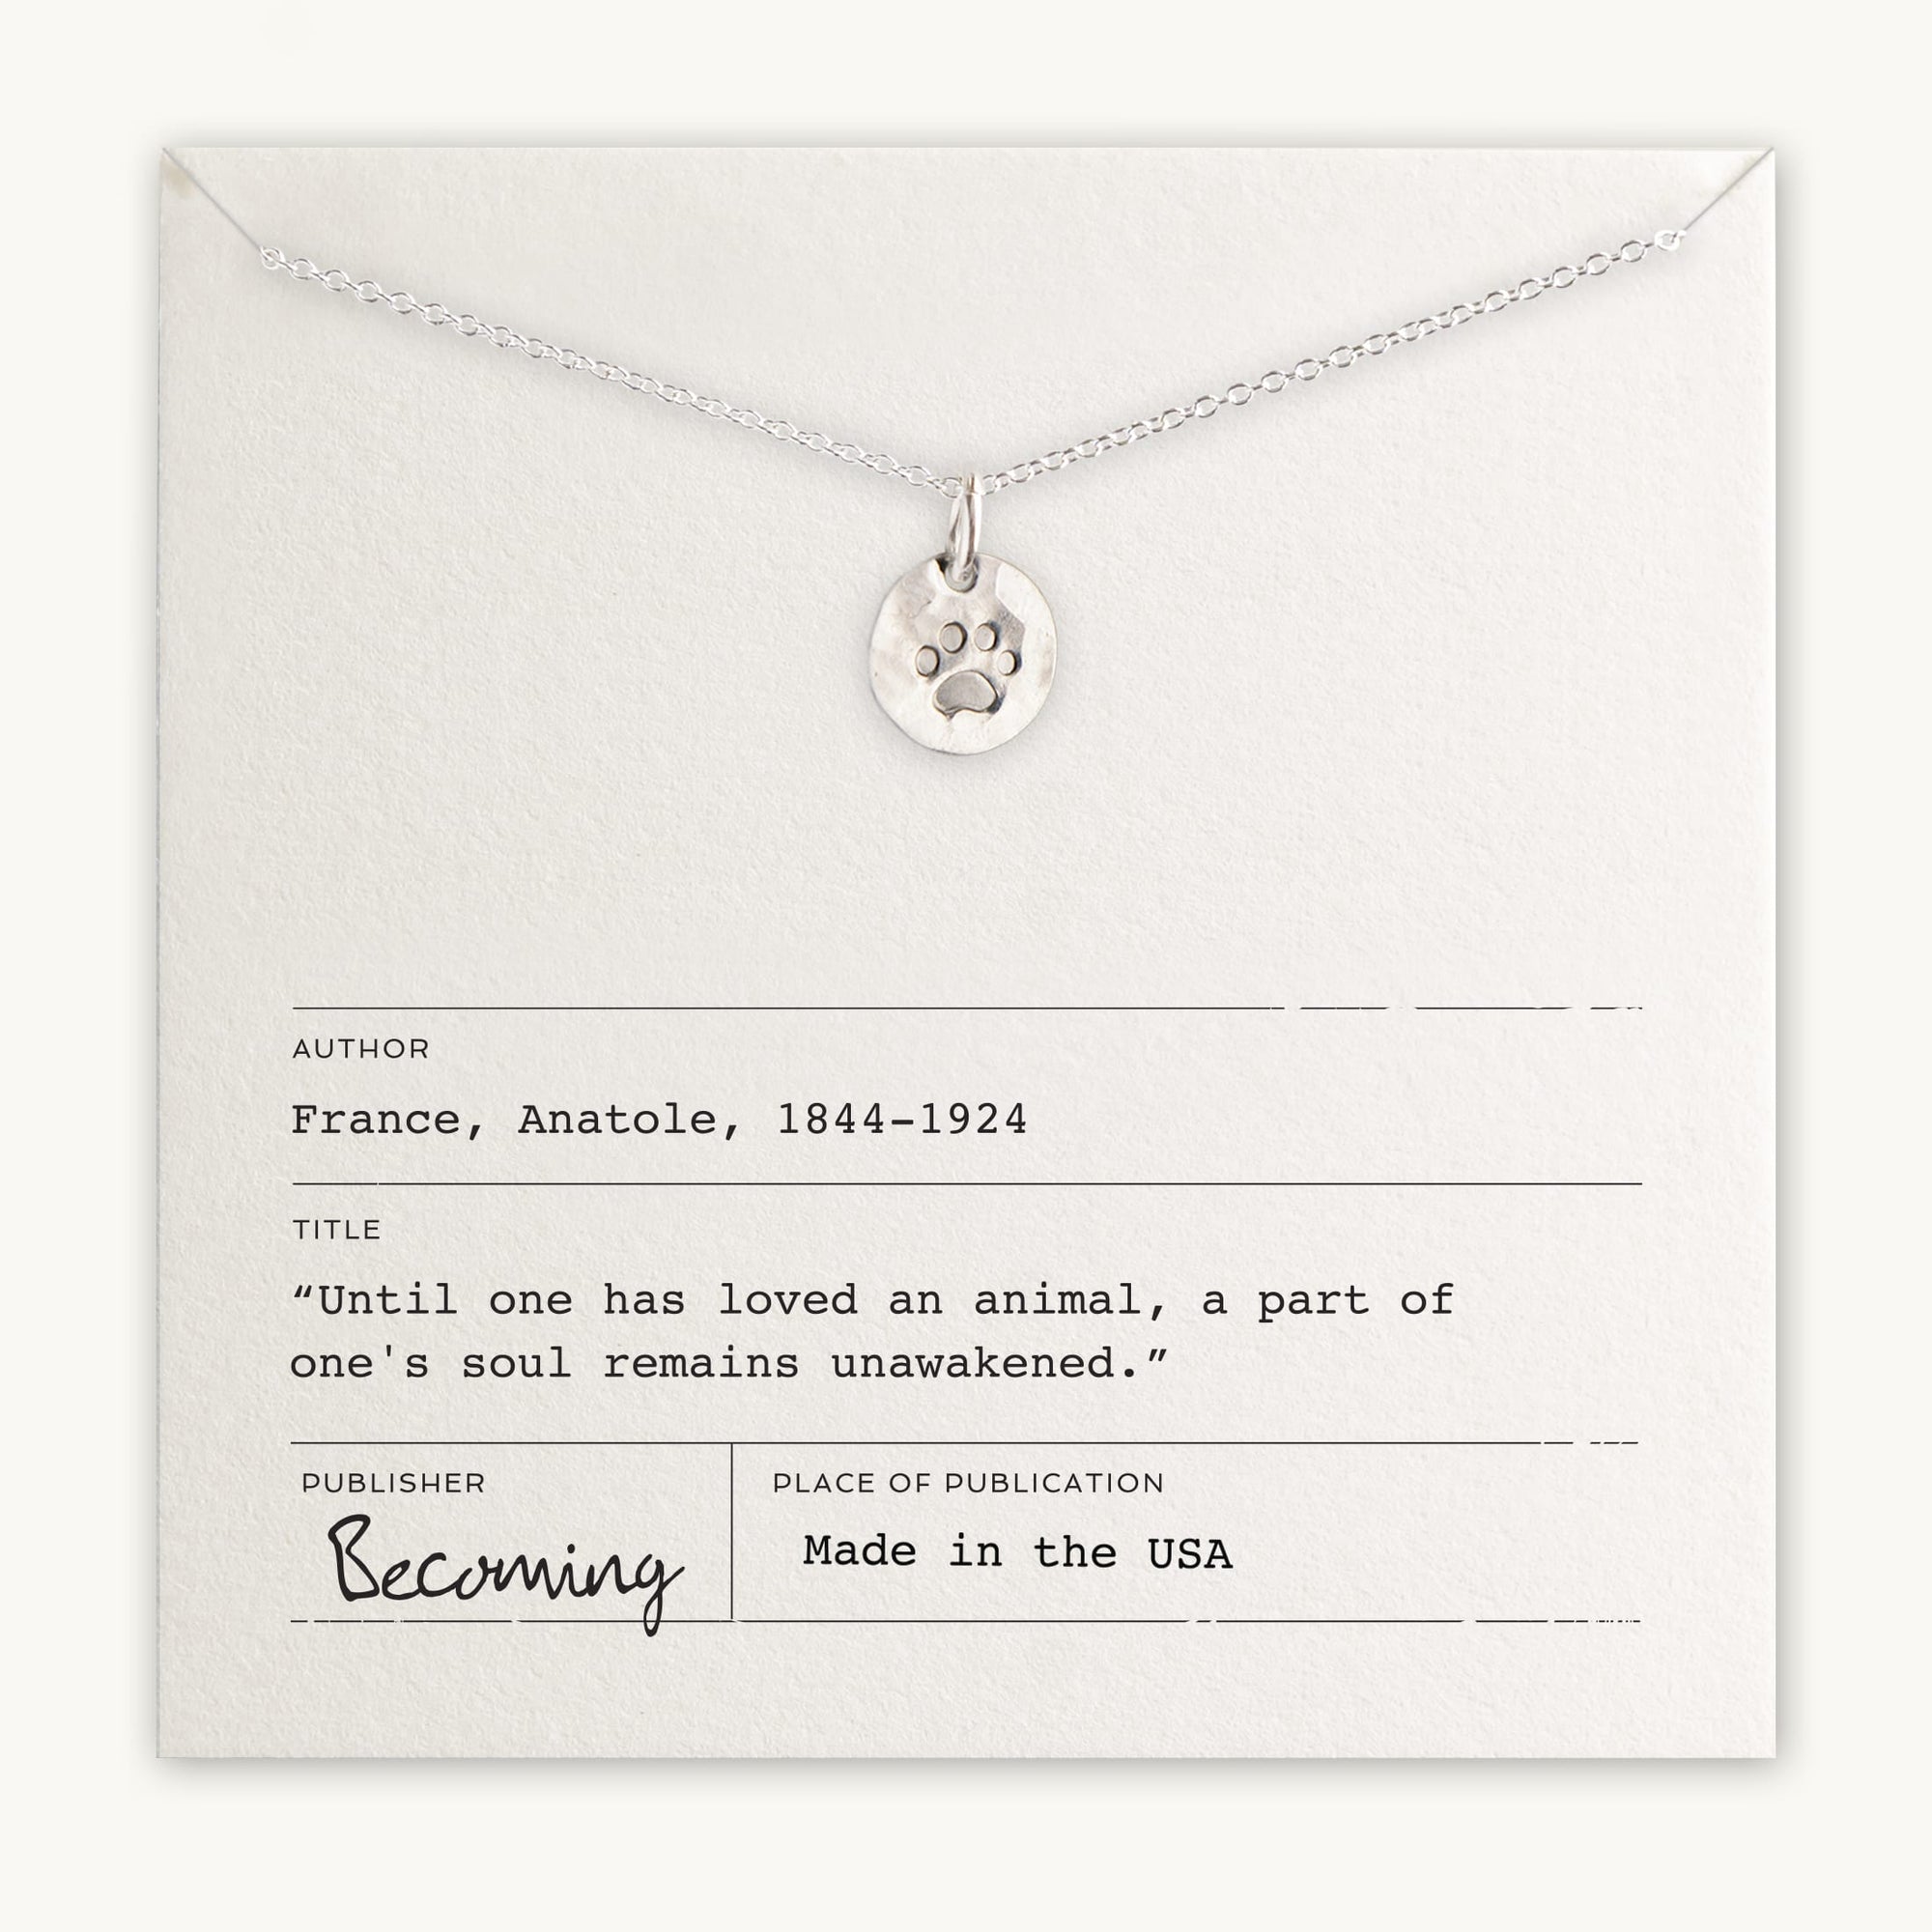 Becoming Jewelry&#39;s Paw Print Necklace with paw print charm pendant presented on a card with an Anatole France quote.